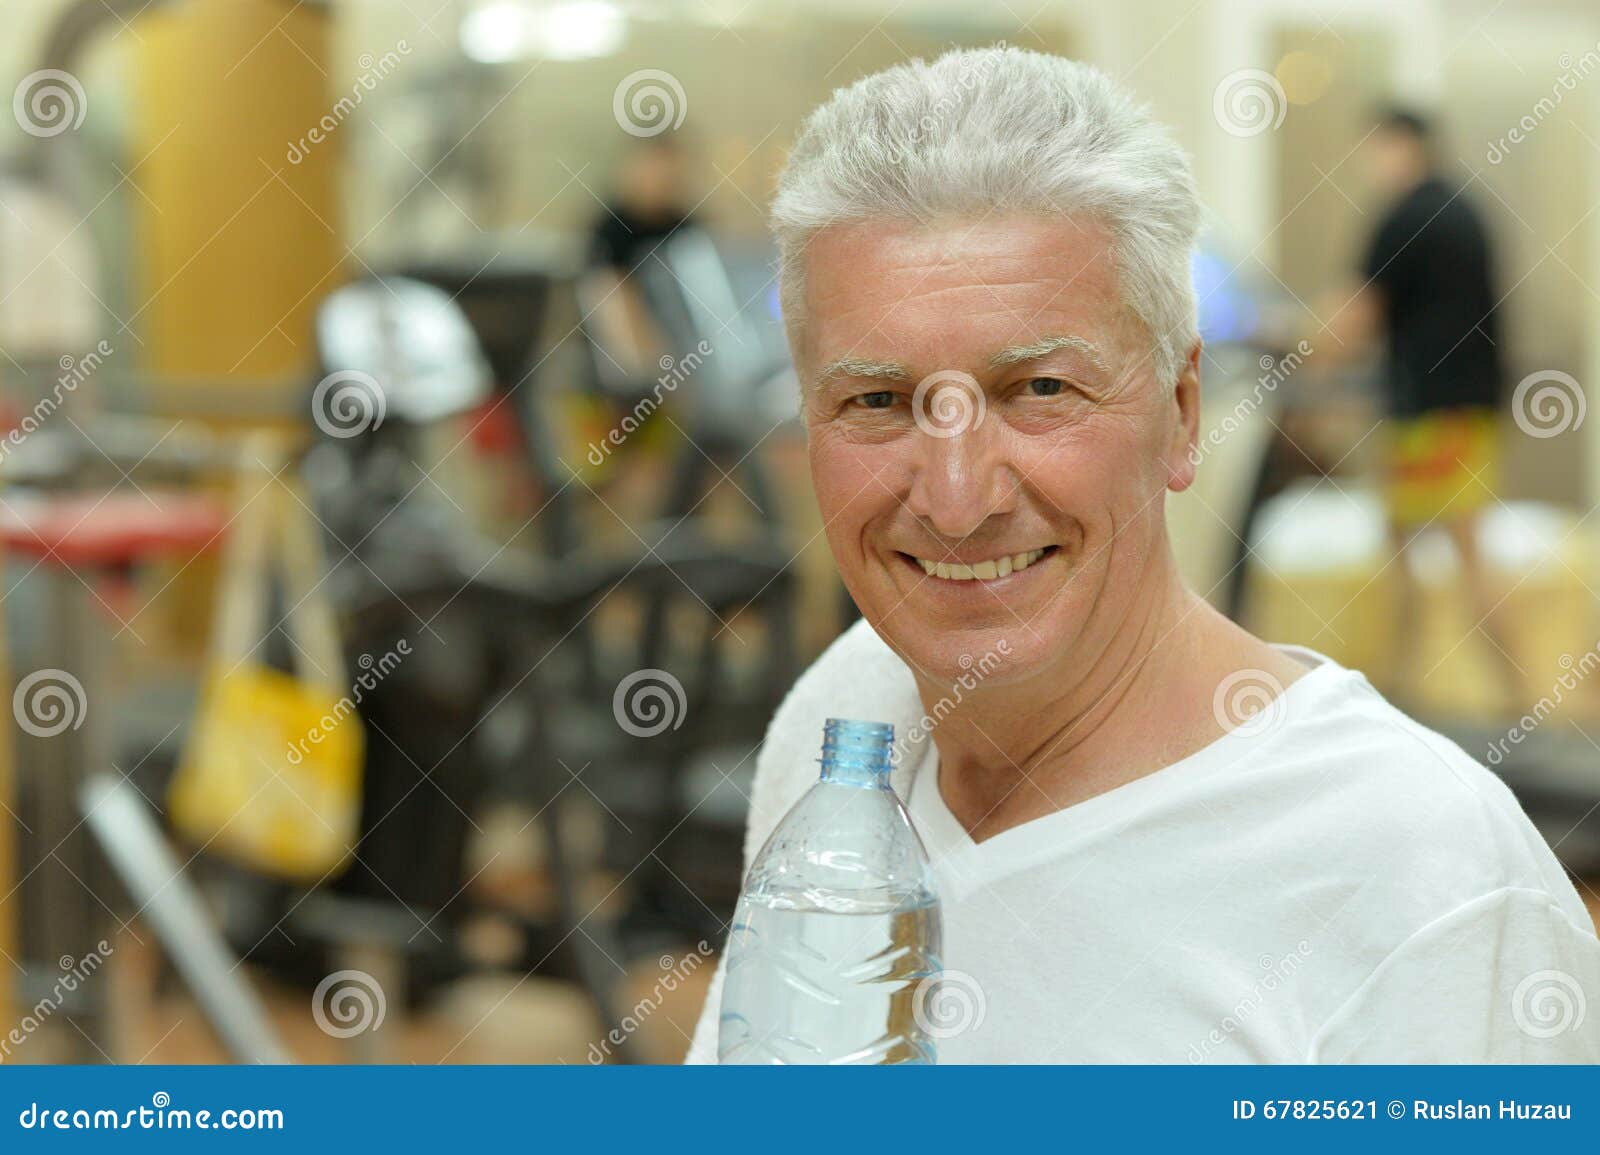 Man Drinking Water After Running. Portrait. Stock Photo by ©puhhha 175382922